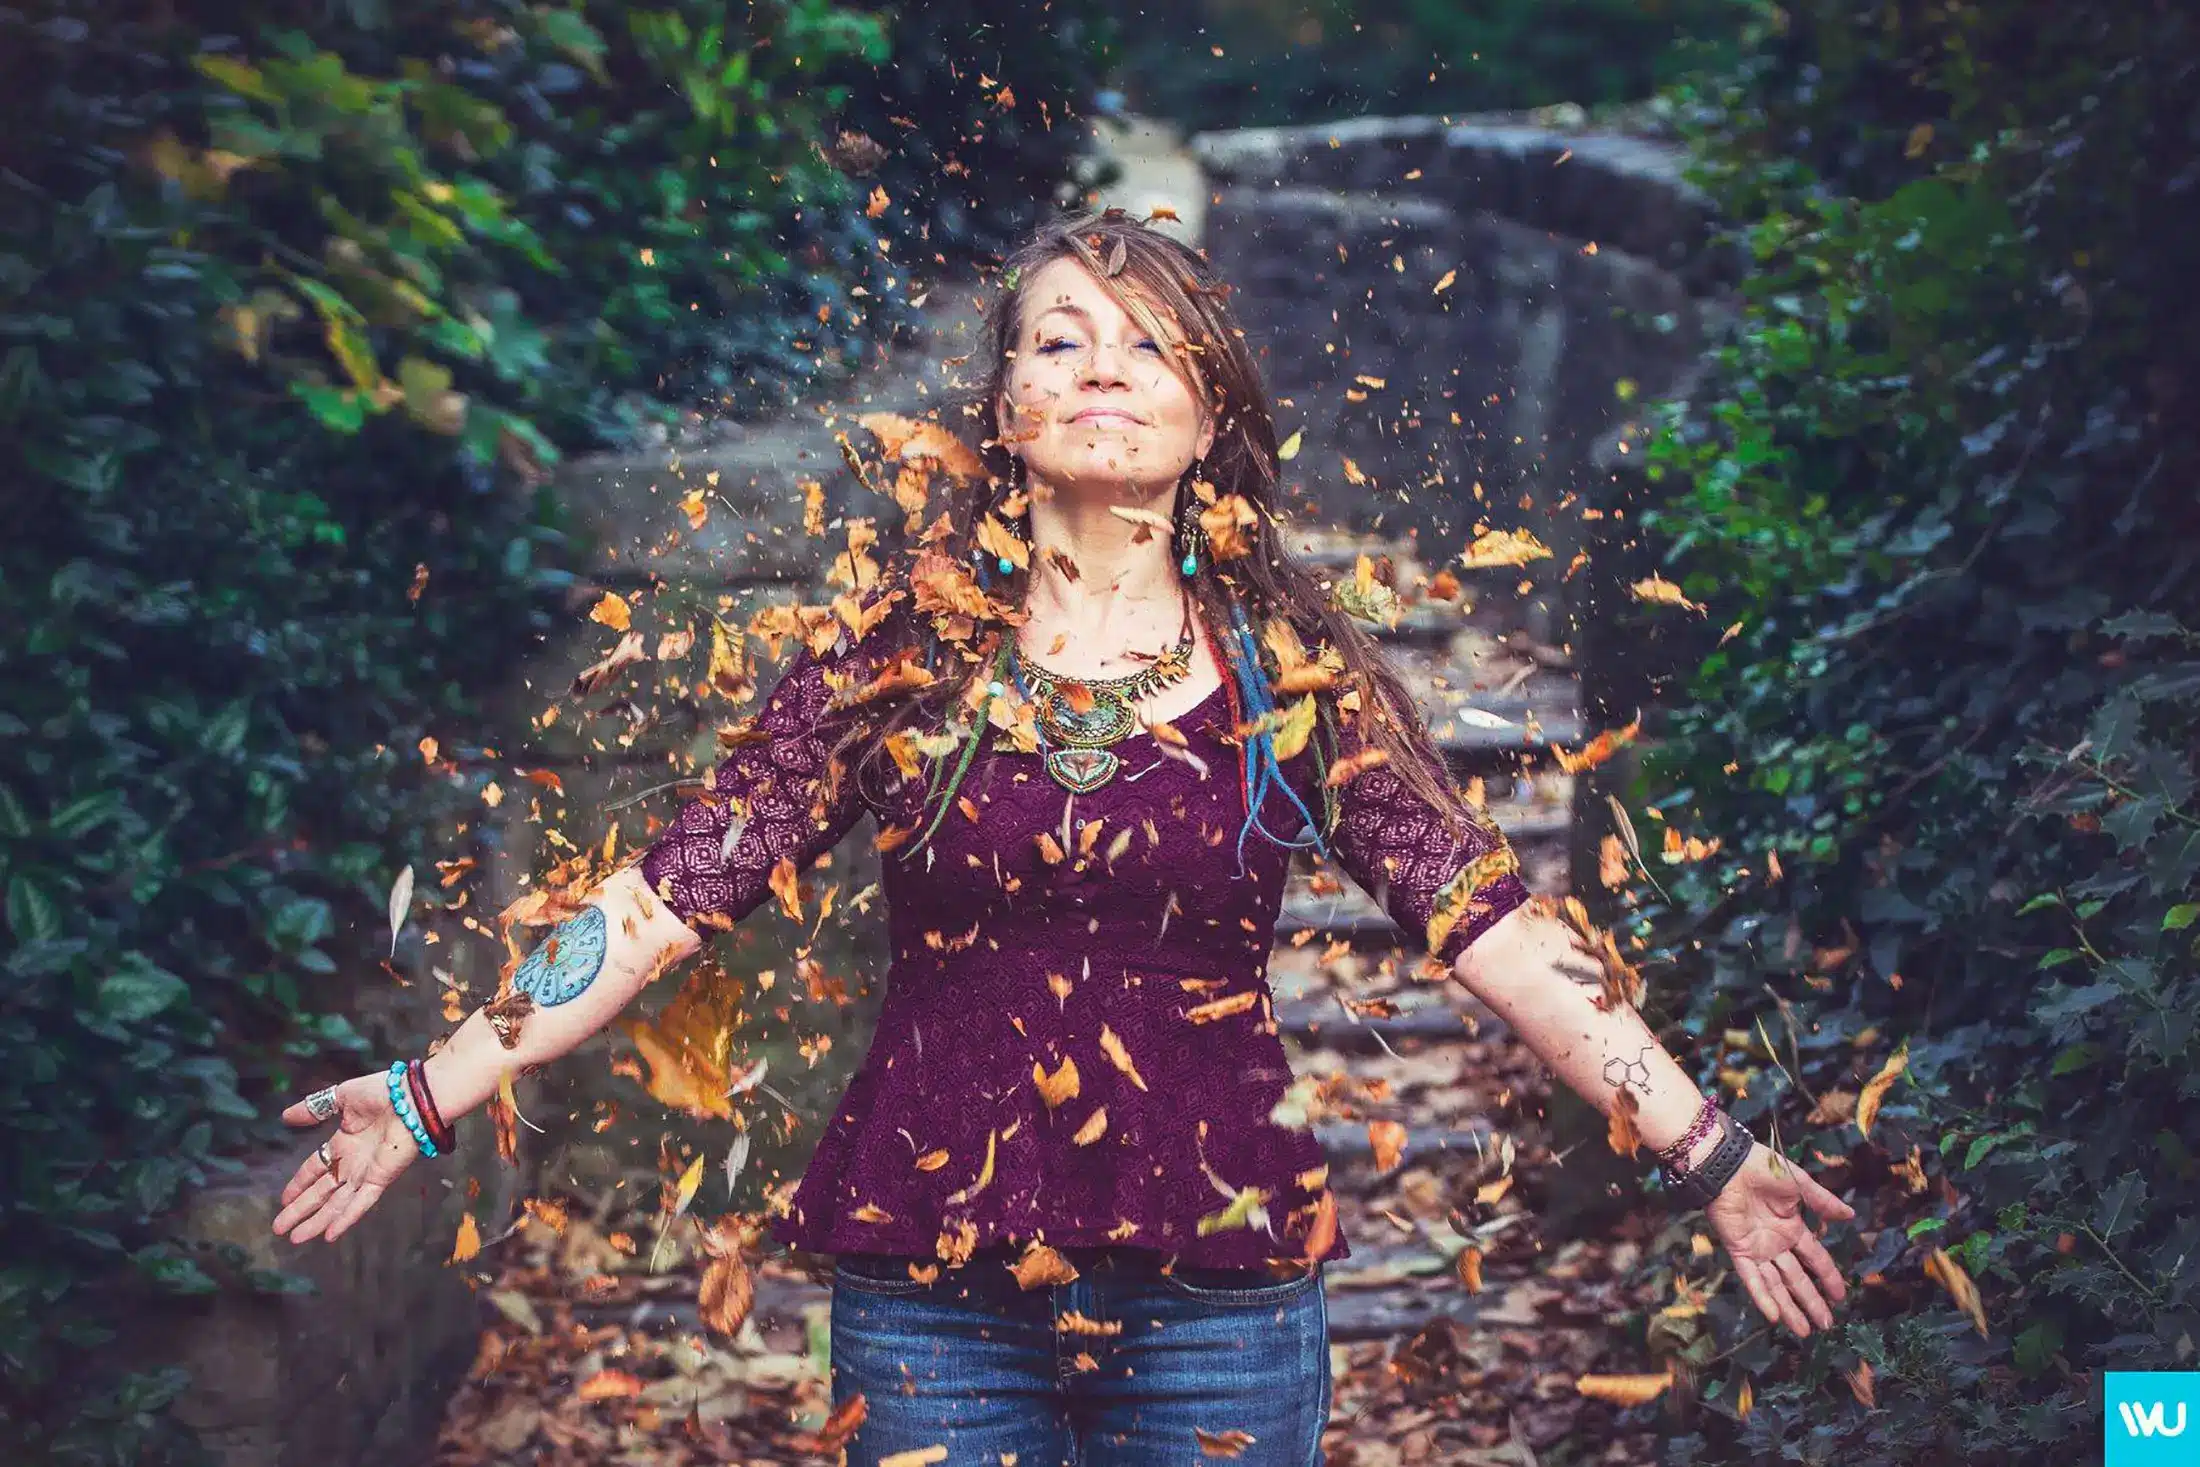 Colourful portrait of a woman throwing autumn leaves into the air